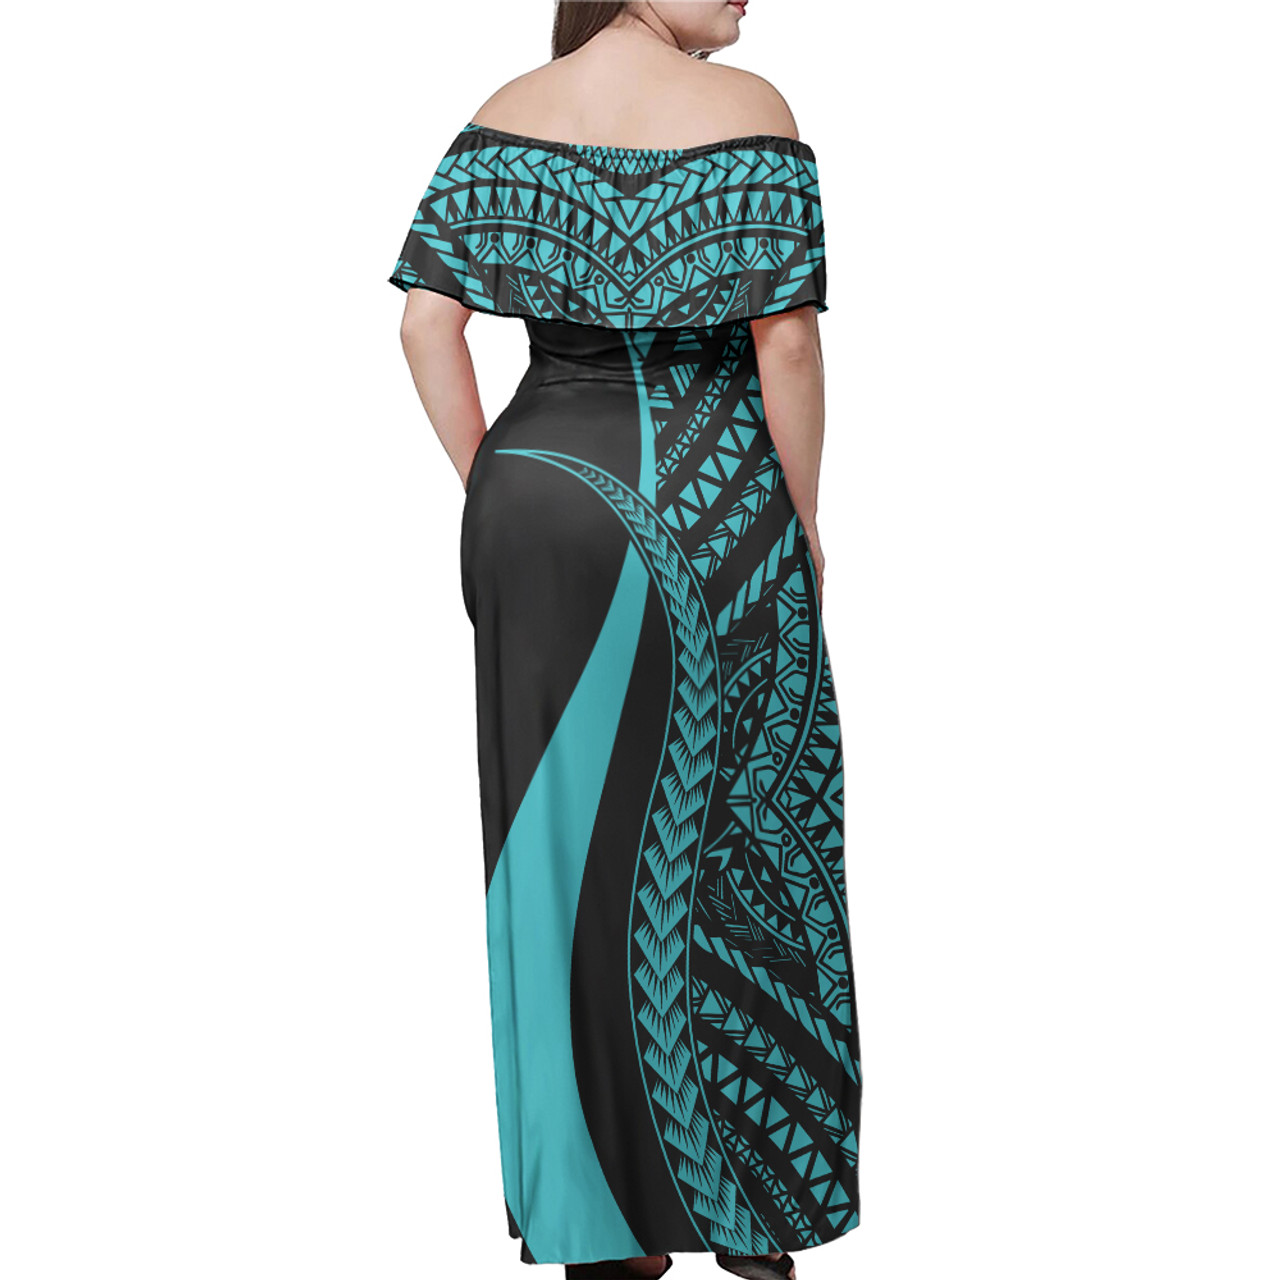 Kosrae Combo Dress And Shirt - Micronesian Tentacle Tribal Pattern Turquoise